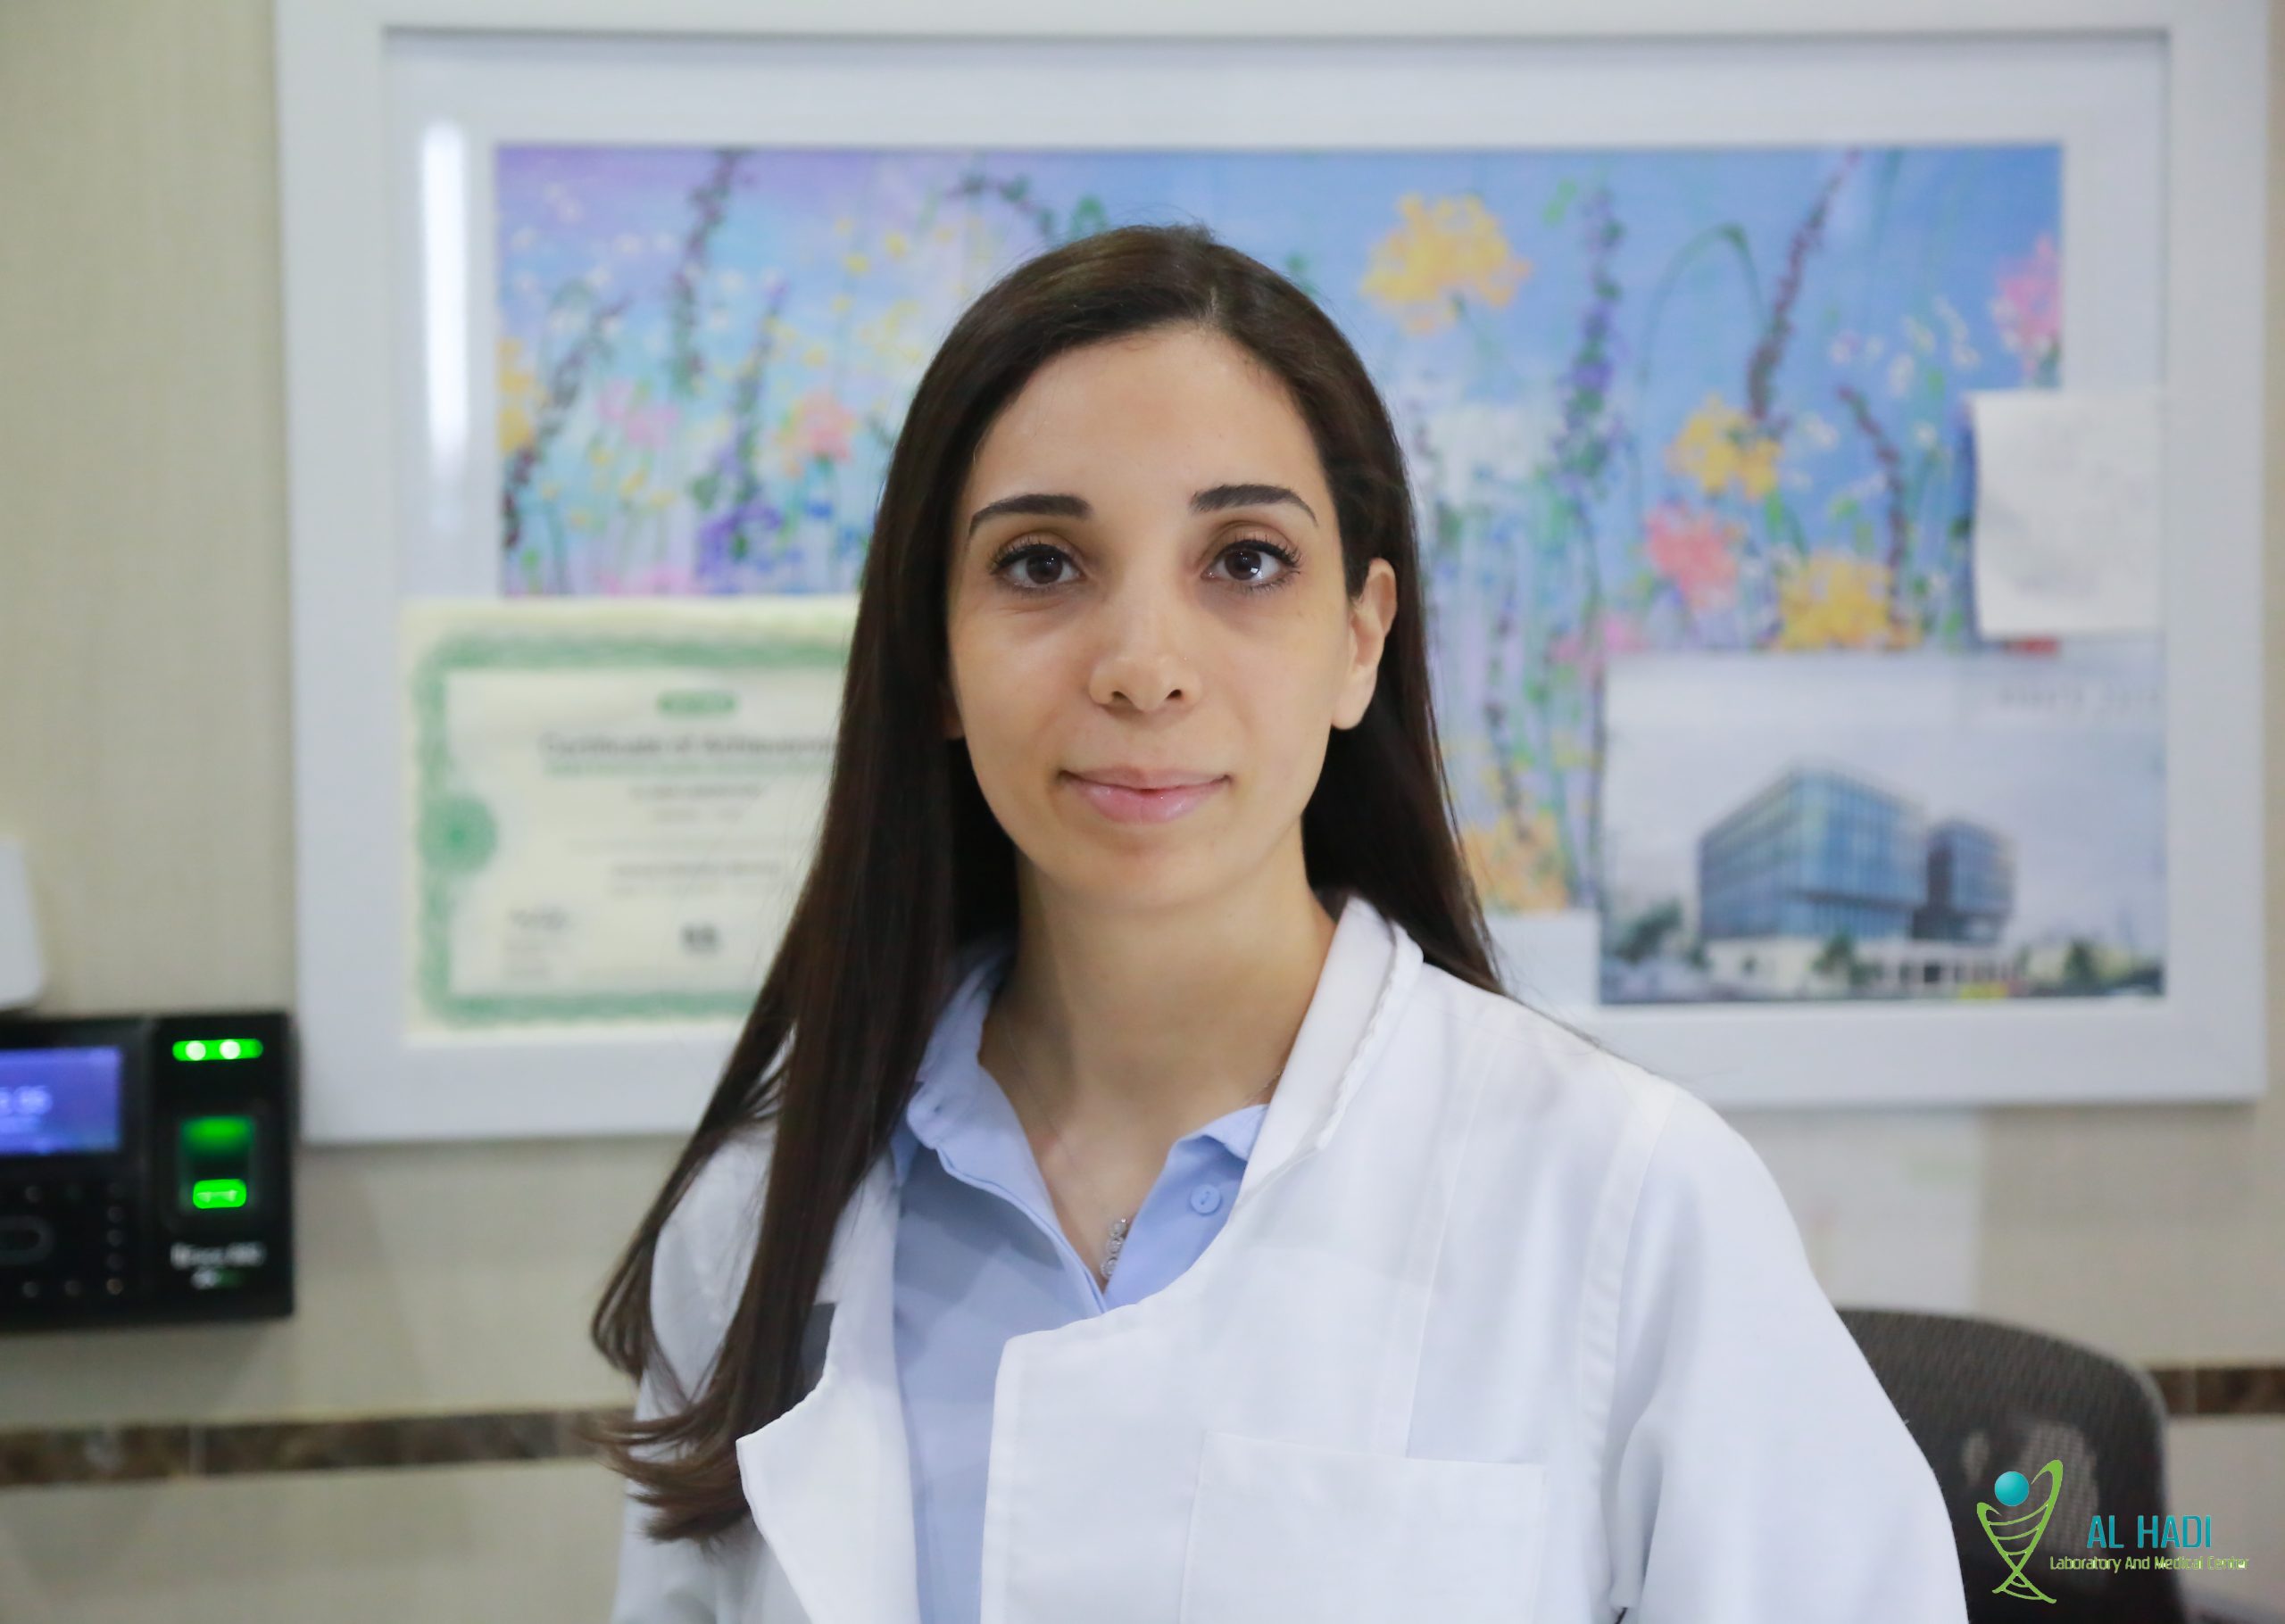 Dr. Youmna Mourad